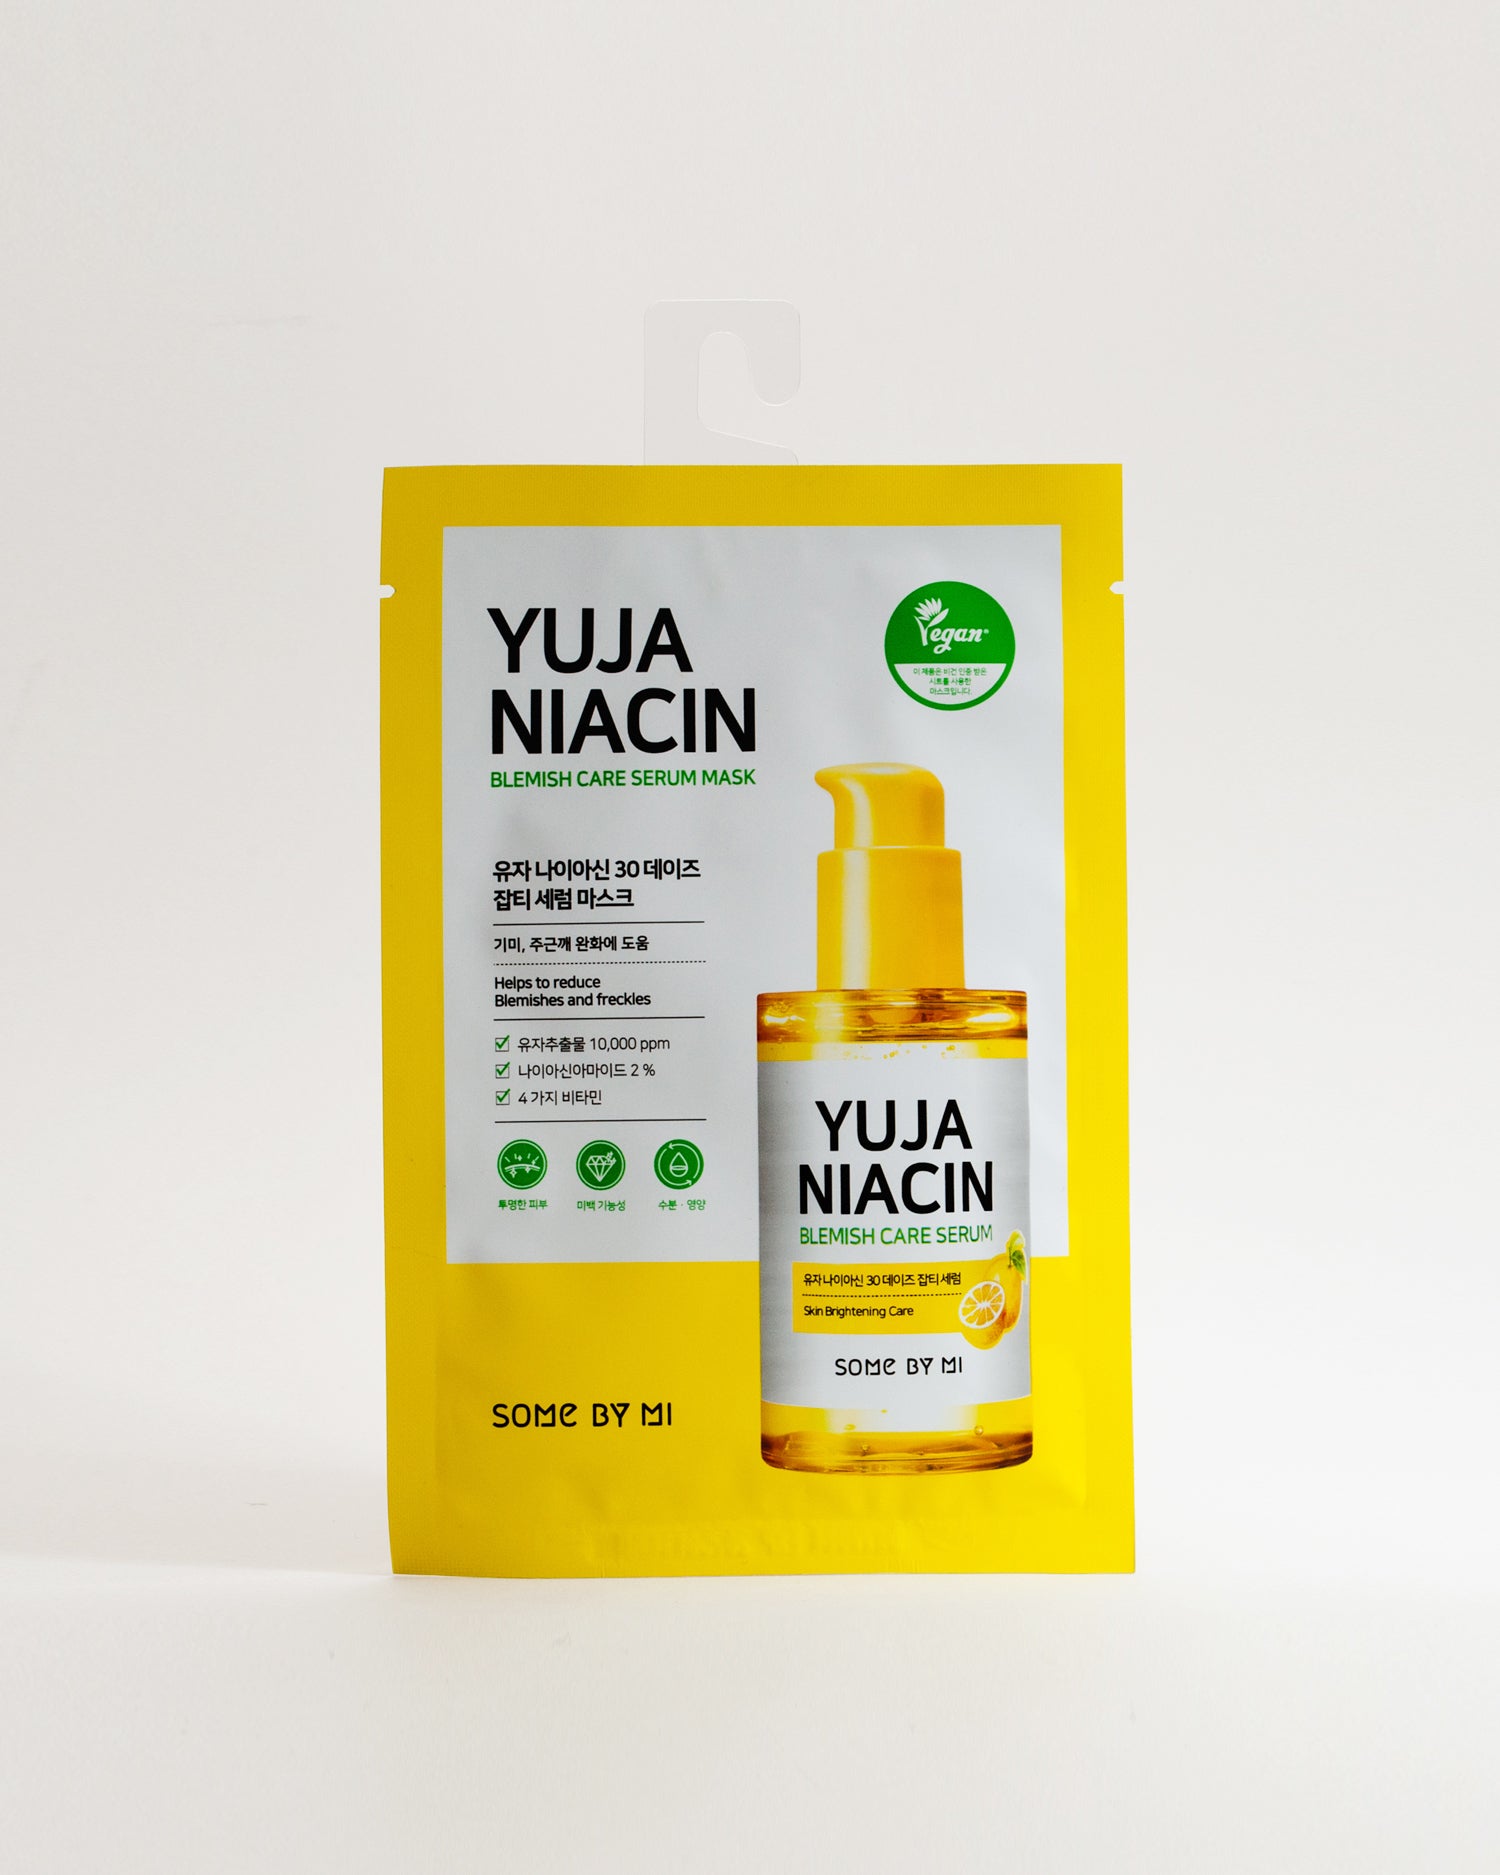 Some By Mi Yuja Niacin 30 Days Blemish Care Serum Mask - 1 Pack of 10 Sheets